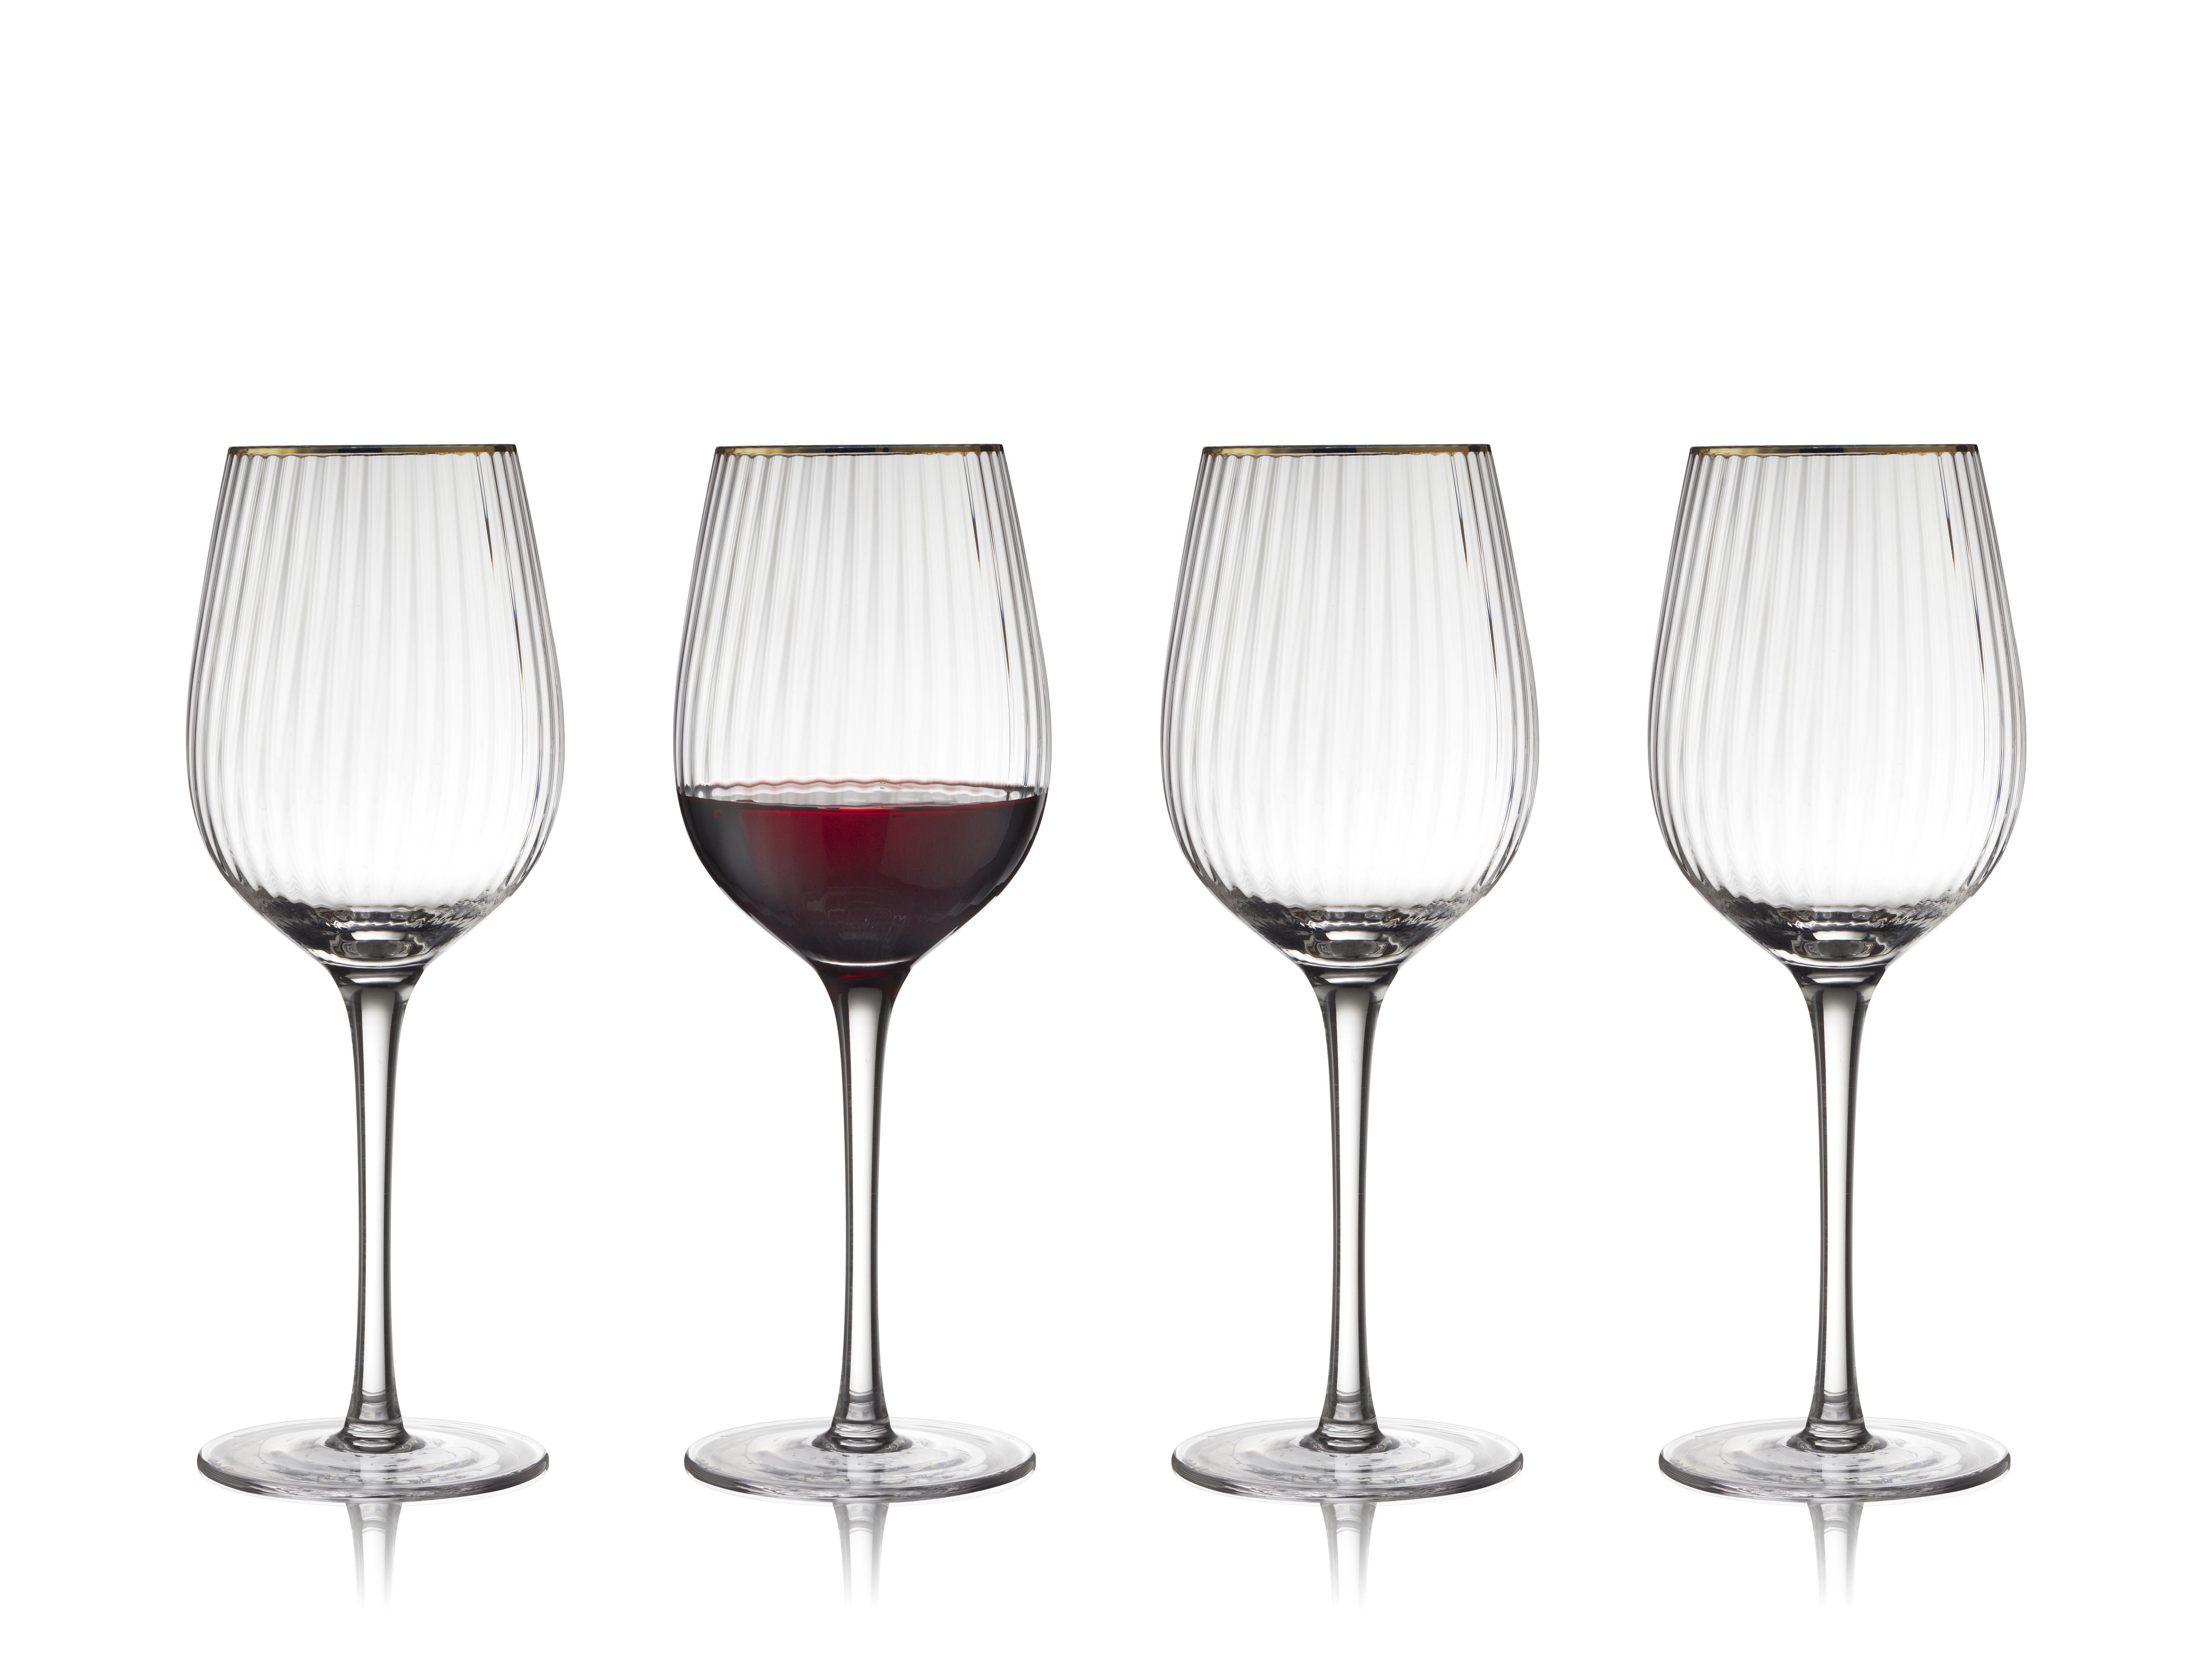 Lyngby Glas Palermo Gold Red Wine Glass 40 Cl 4 Pcs.